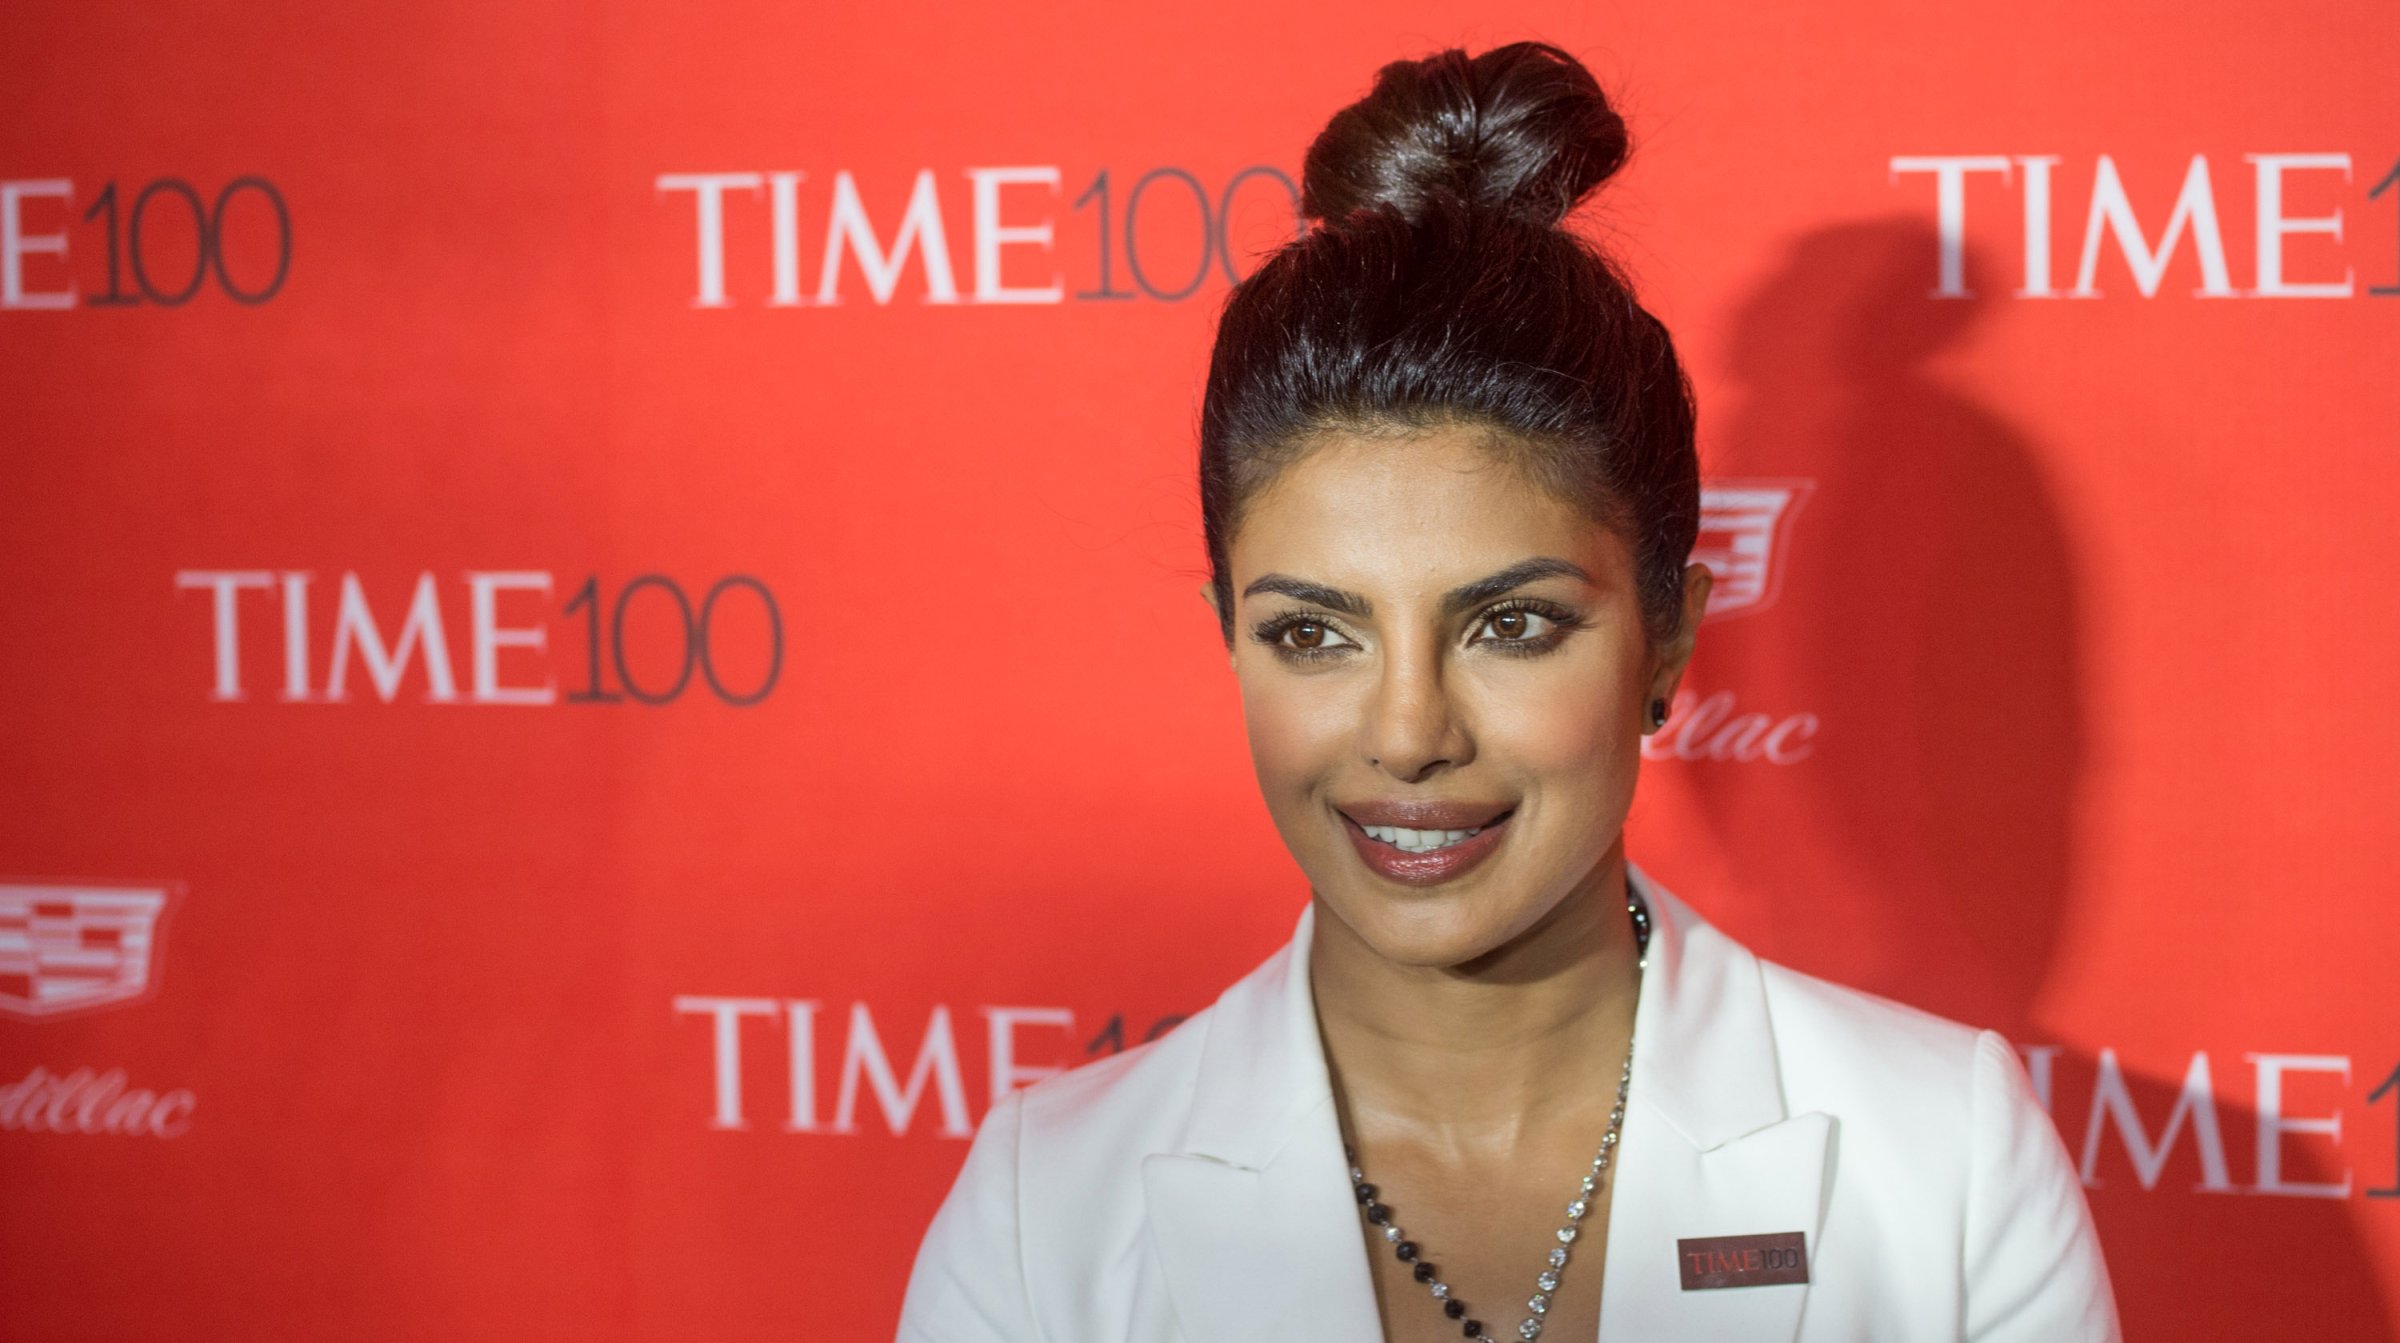 Actress Priyanka Chopra attends the 2016 Time 100 Gala at Frederick P. Rose Hall, Jazz at Lincoln Center on April 26, 2016 in New York City.